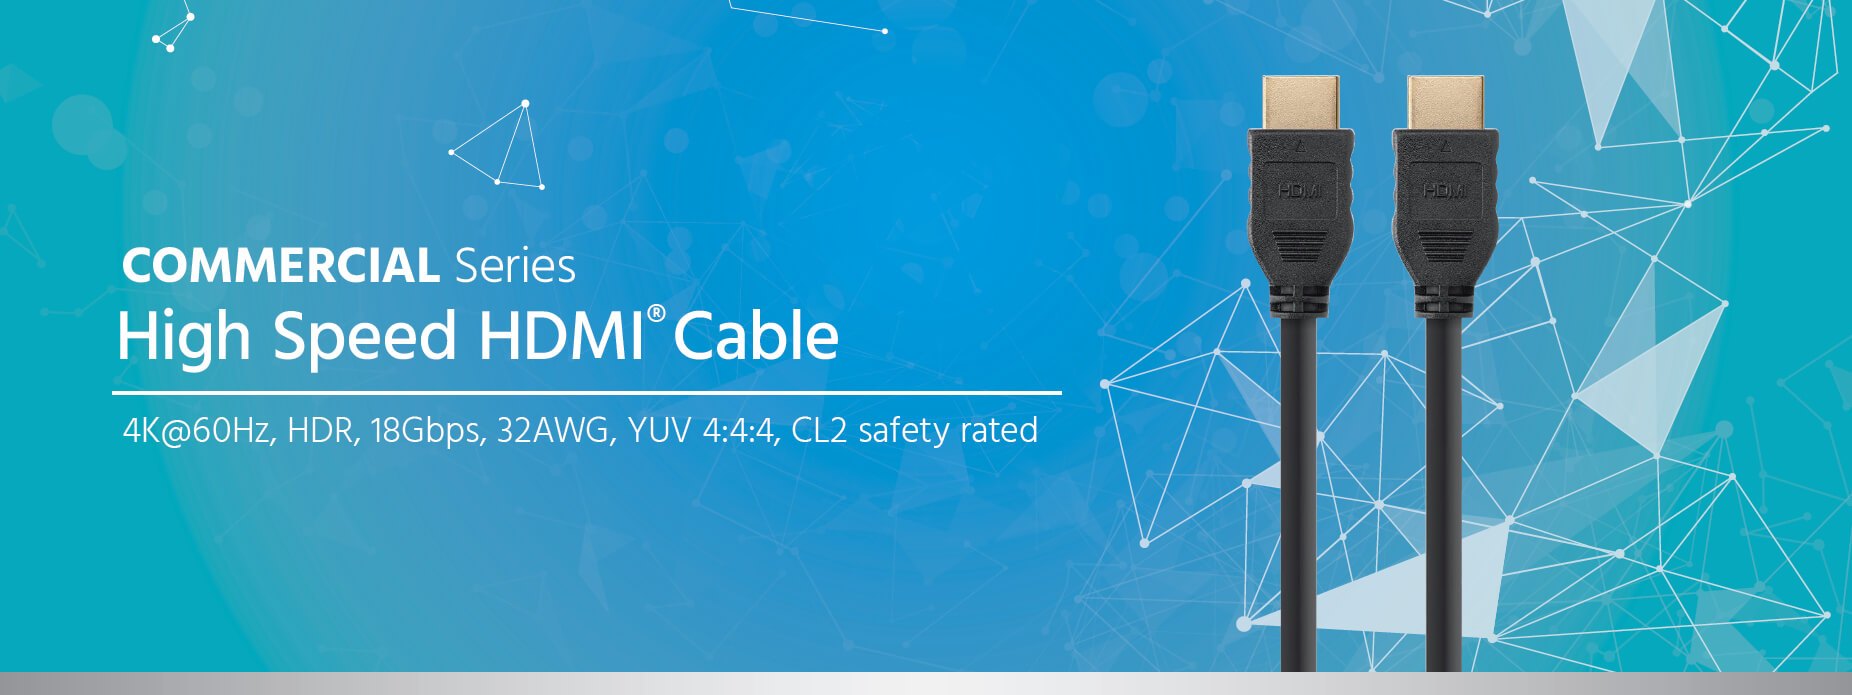 Commercial Series High Speed HDMI Cable